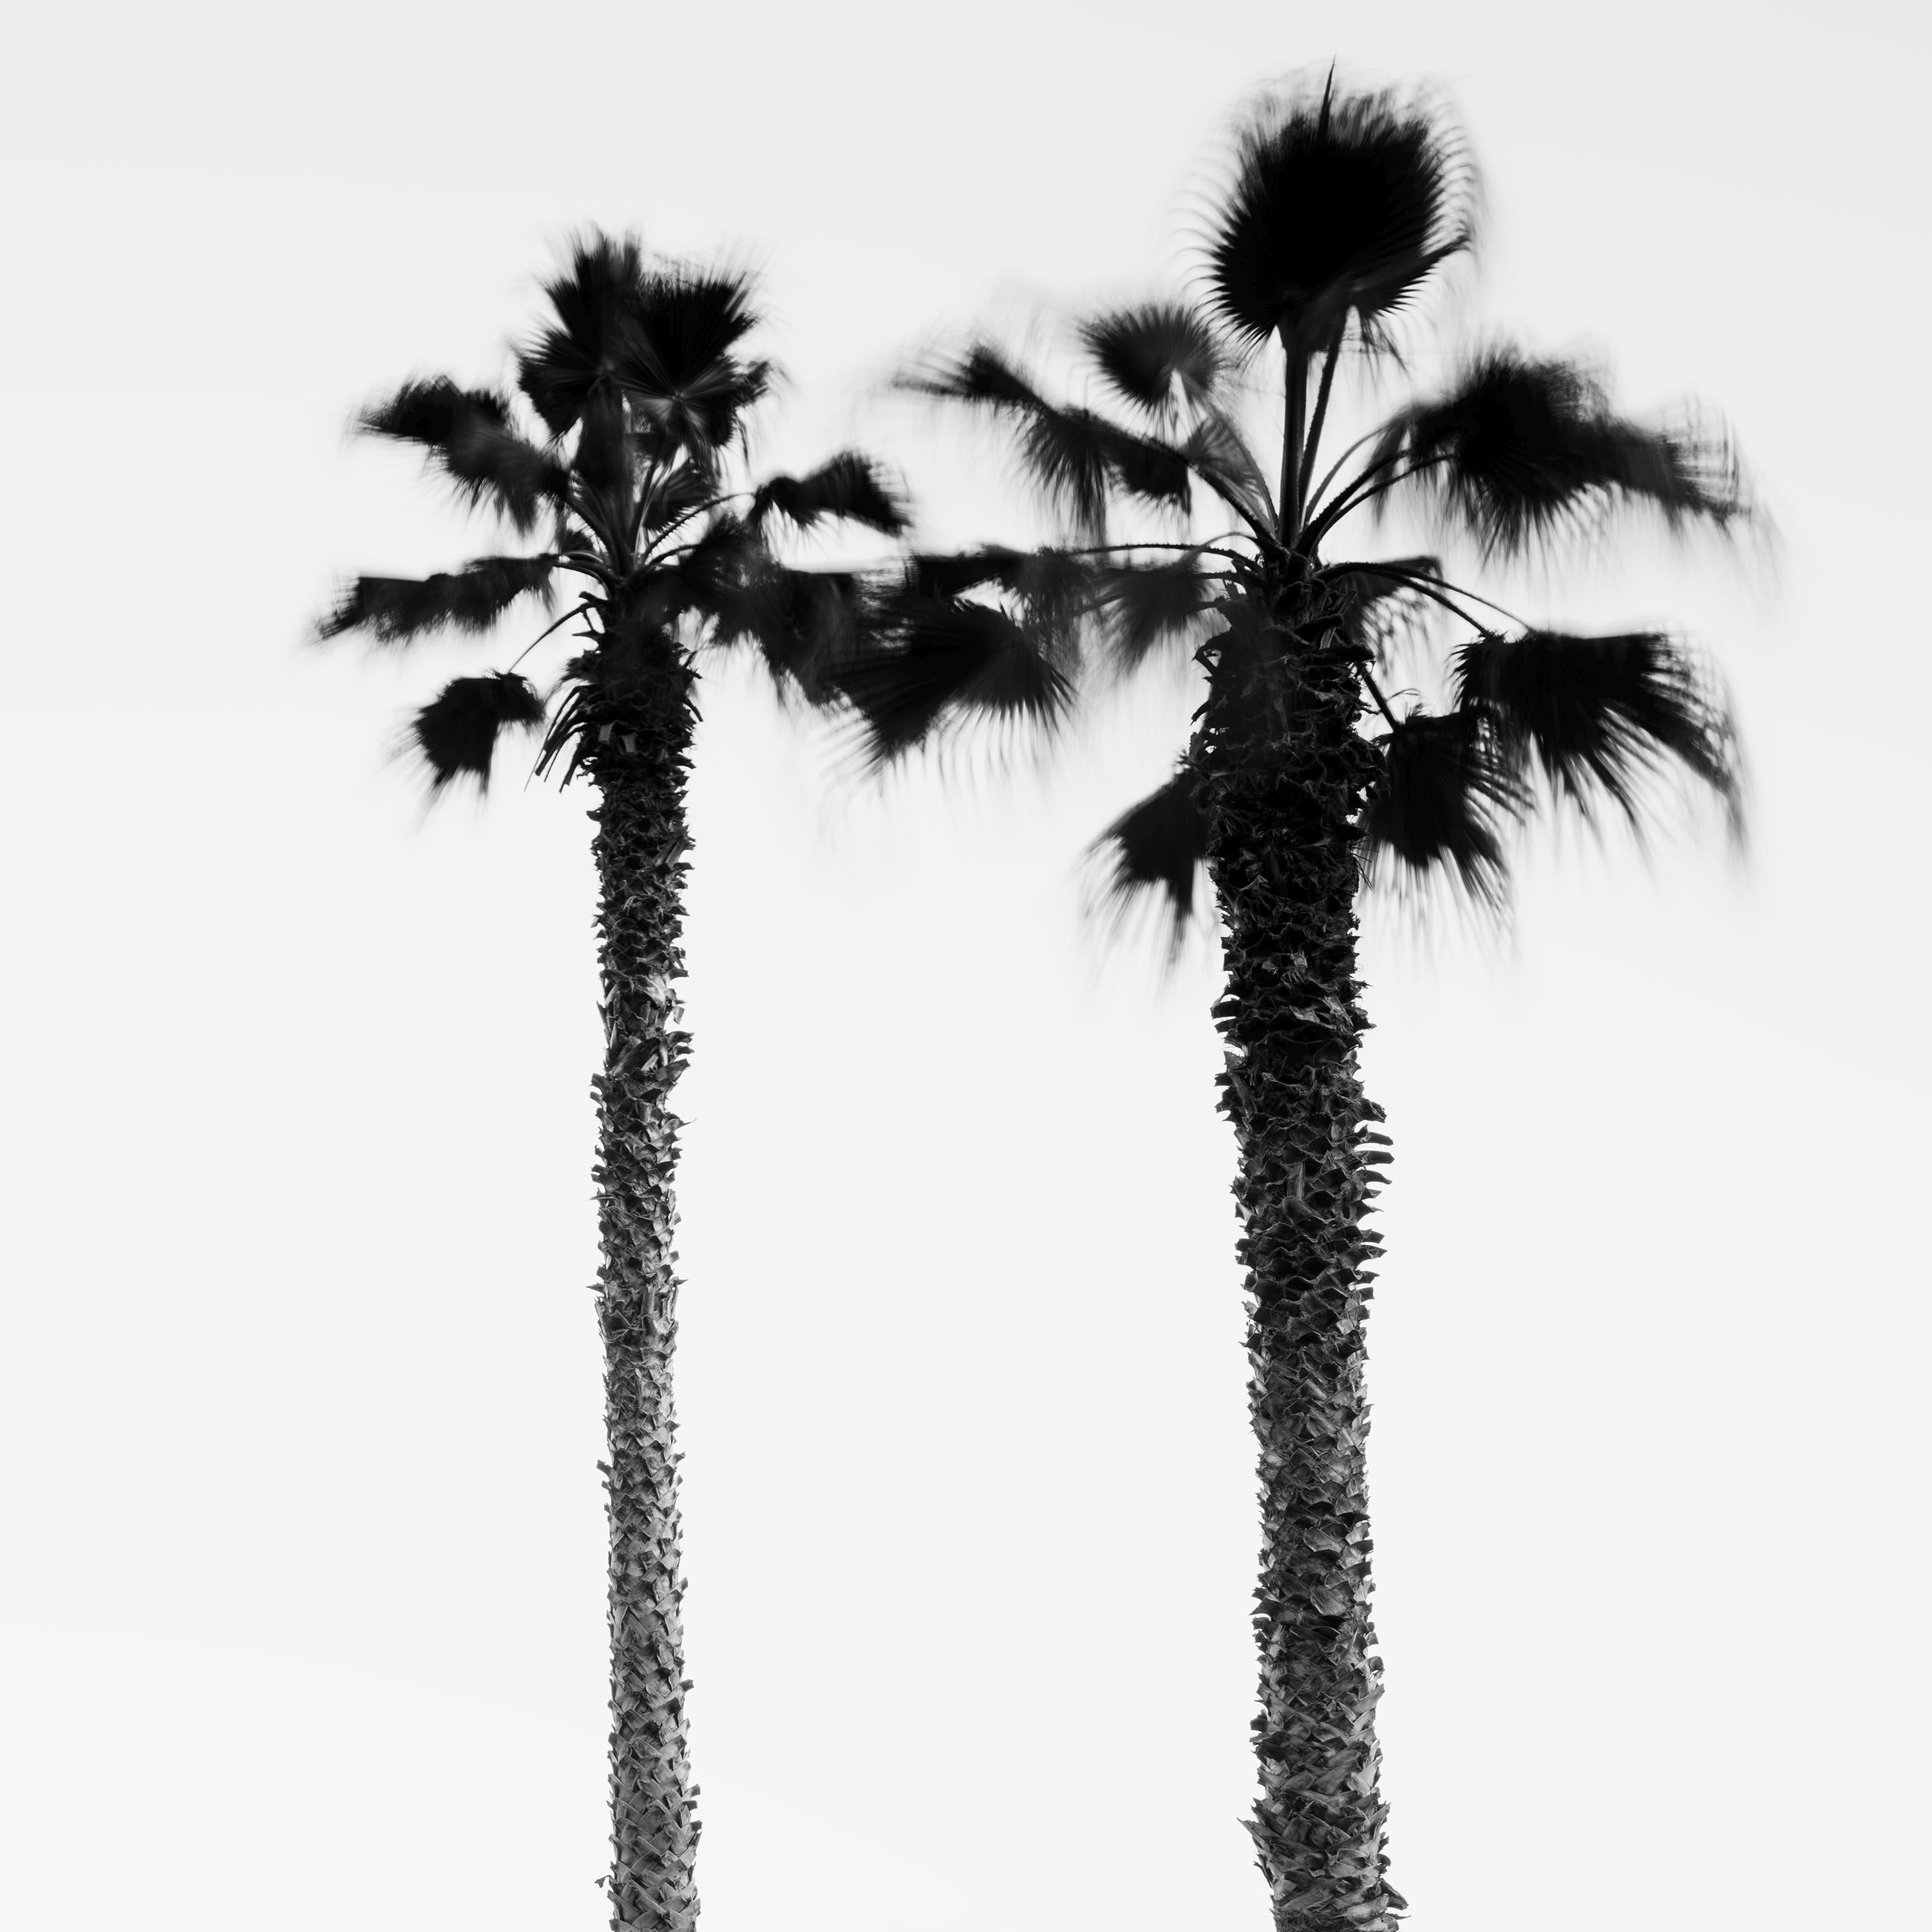 Parking lot with Palm Trees, Madeira, black and white photography, art landscape For Sale 2